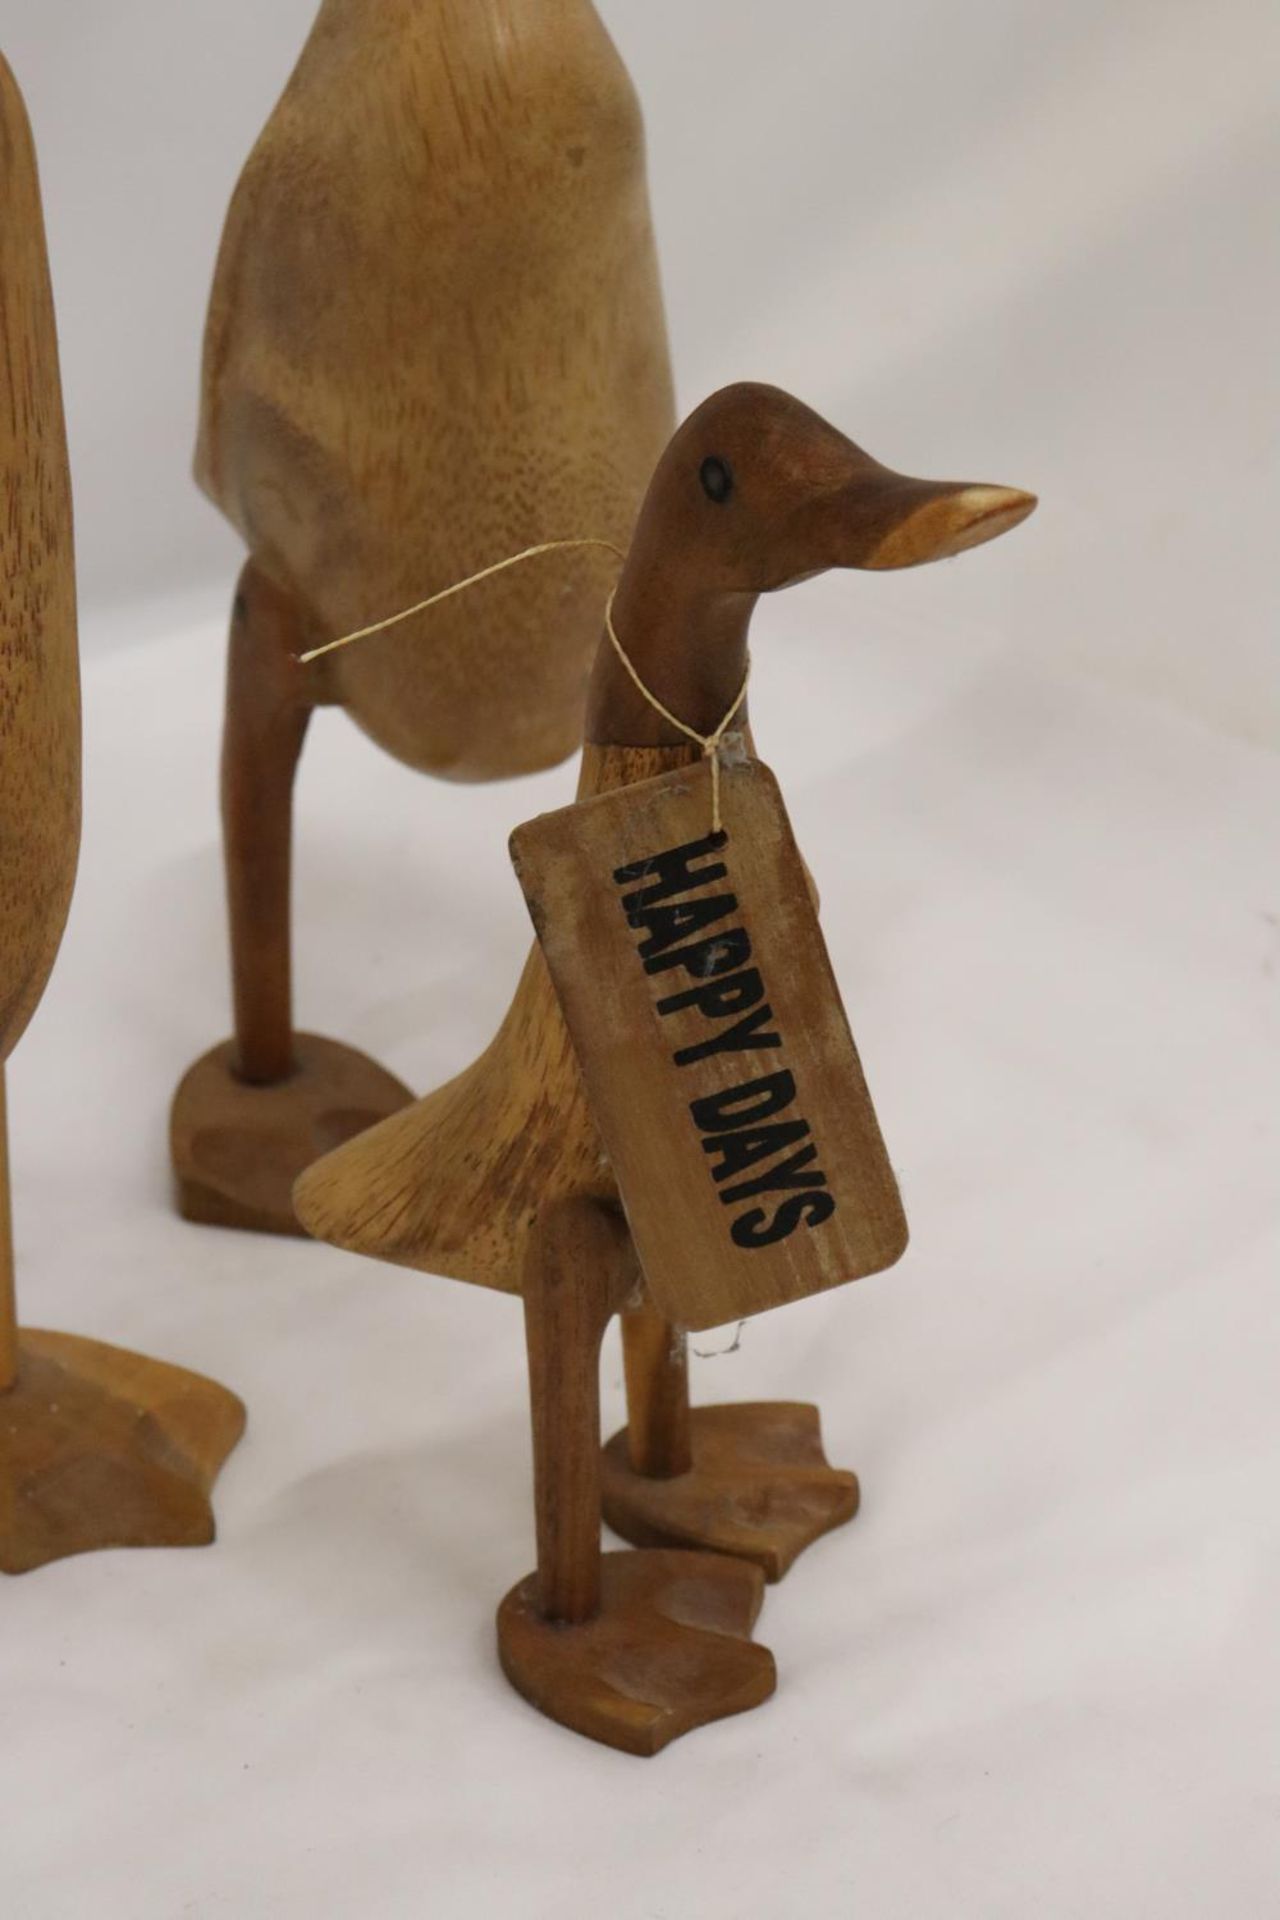 A WOODEN DUCK FAMILY TO INCLUDE DADDY DUCK, MUMMY DUCK AND BABY DUCK - Image 5 of 5